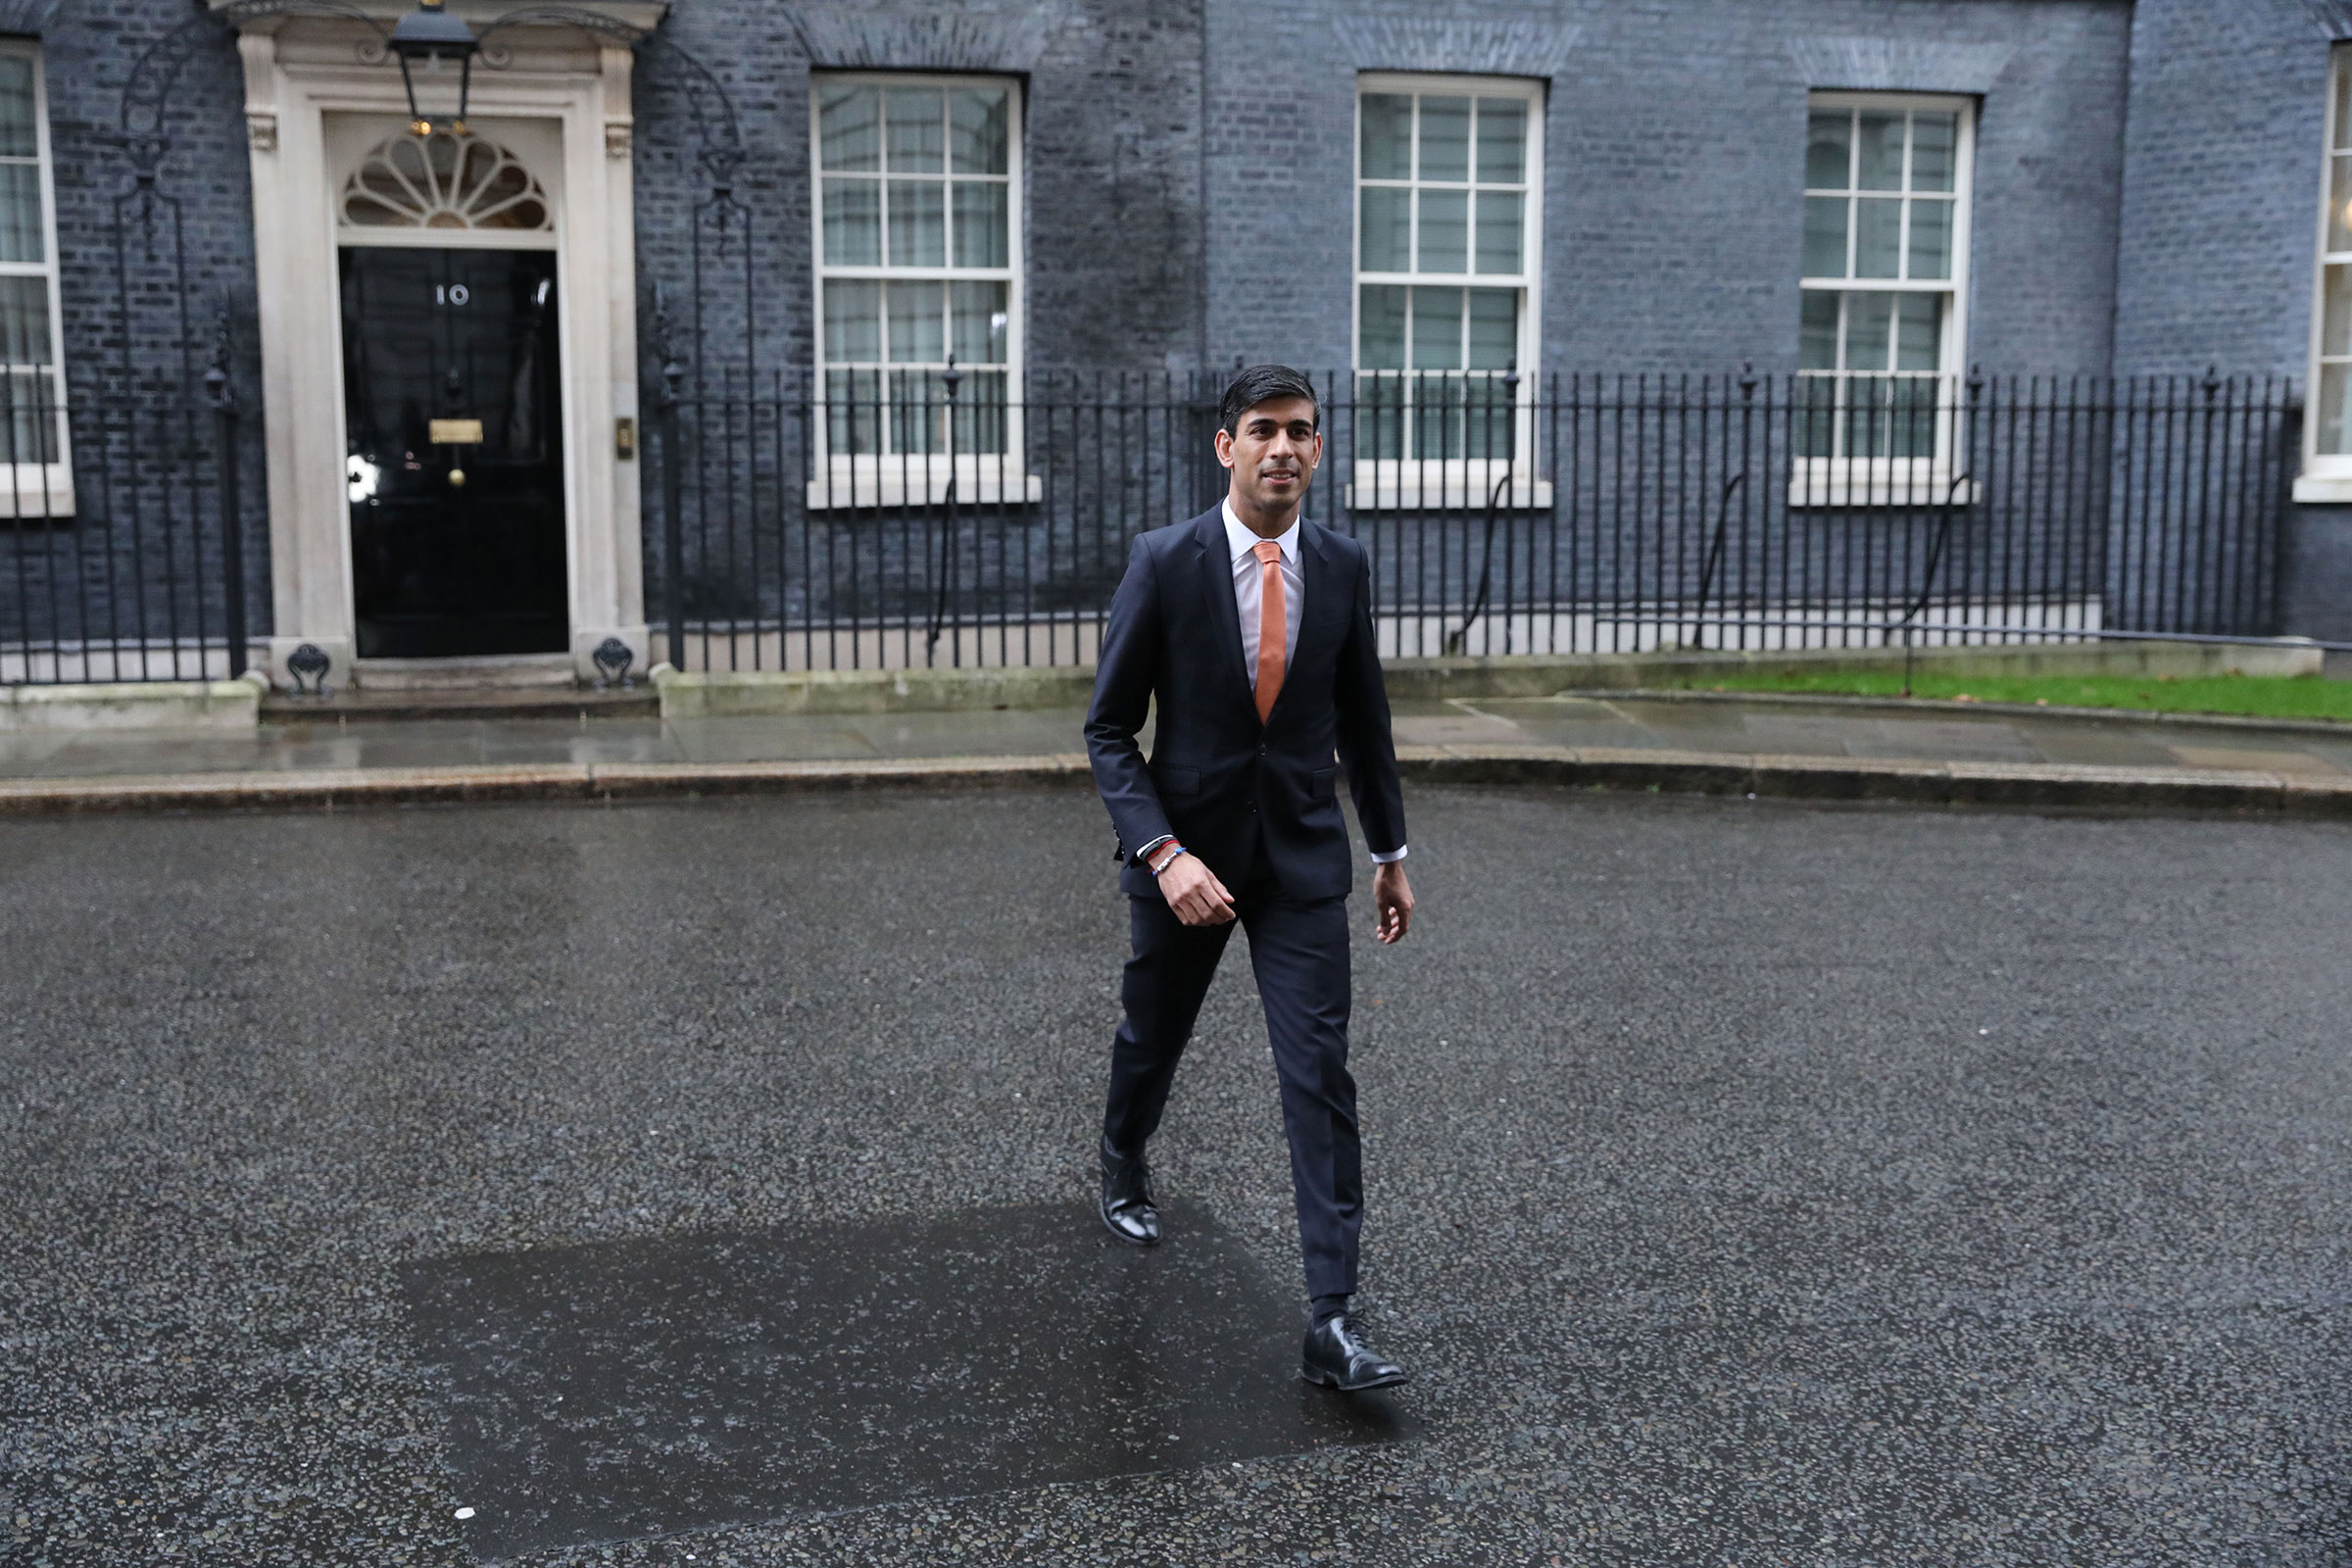 TIME 100 Next 2021: Britain's newly appointed Chancellor of the Exchequer Rishi Sunak leaves 10 Downing Street in central London on February 13, 2020 after recieving his new role at the Treasury. - Britain's prime minister revamped his top team on February 13 in his first cabinet reshuffle since taking Britain out of the European Union. (Photo by ISABEL INFANTES / AFP) (Photo by ISABEL INFANTES/AFP via Getty Images)